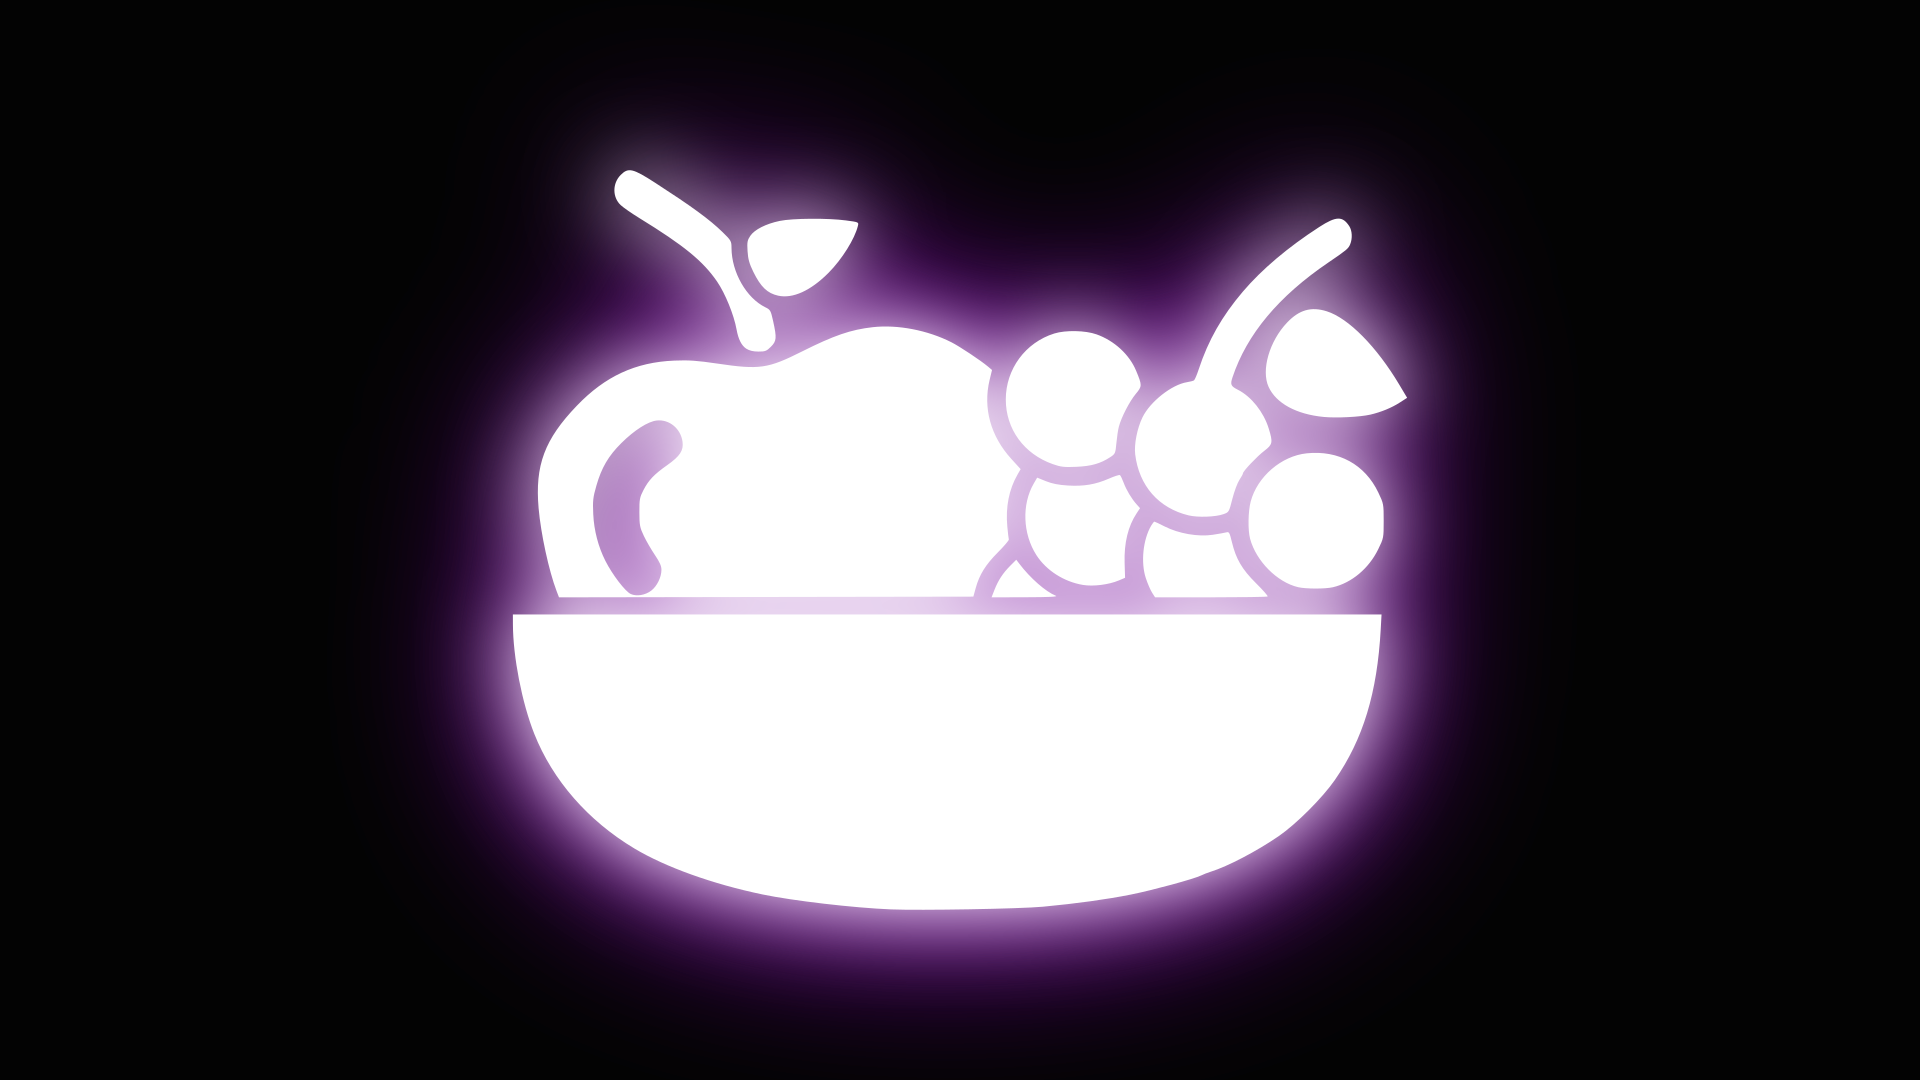 Icon for Fruit Bowl